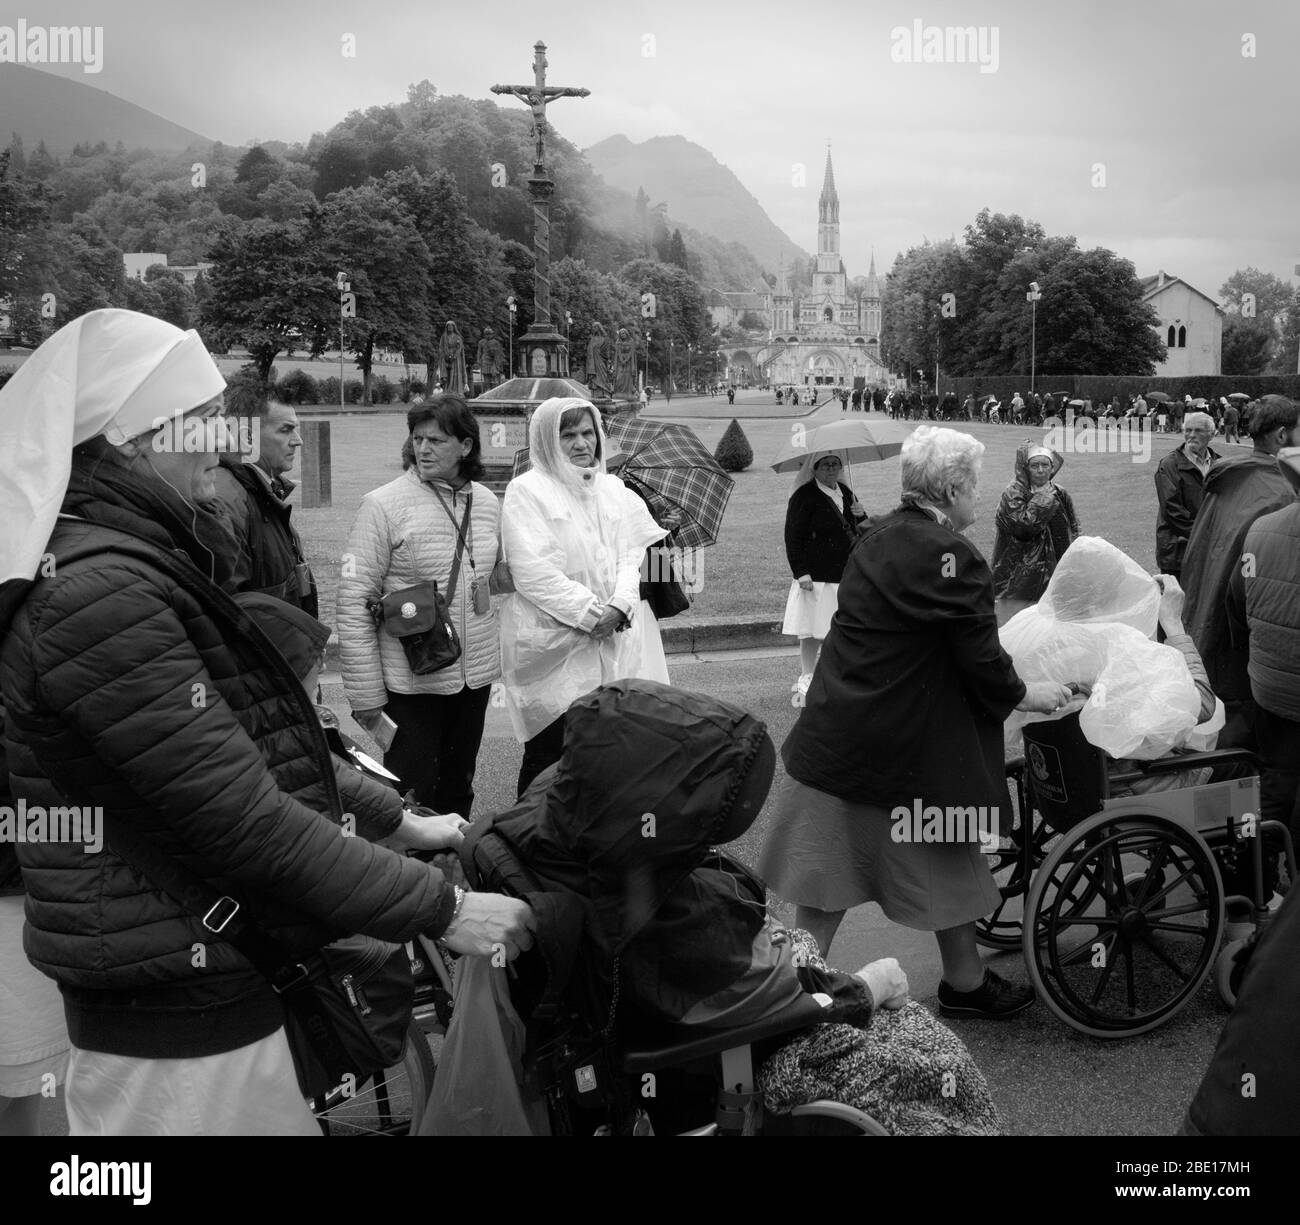 People in wheelchairs being wheeled to the Sanctuary of Our Lady of Lourdes in the hope of solace or cure of their ailments, Lourdes, Hautes-Pyrénées Stock Photo